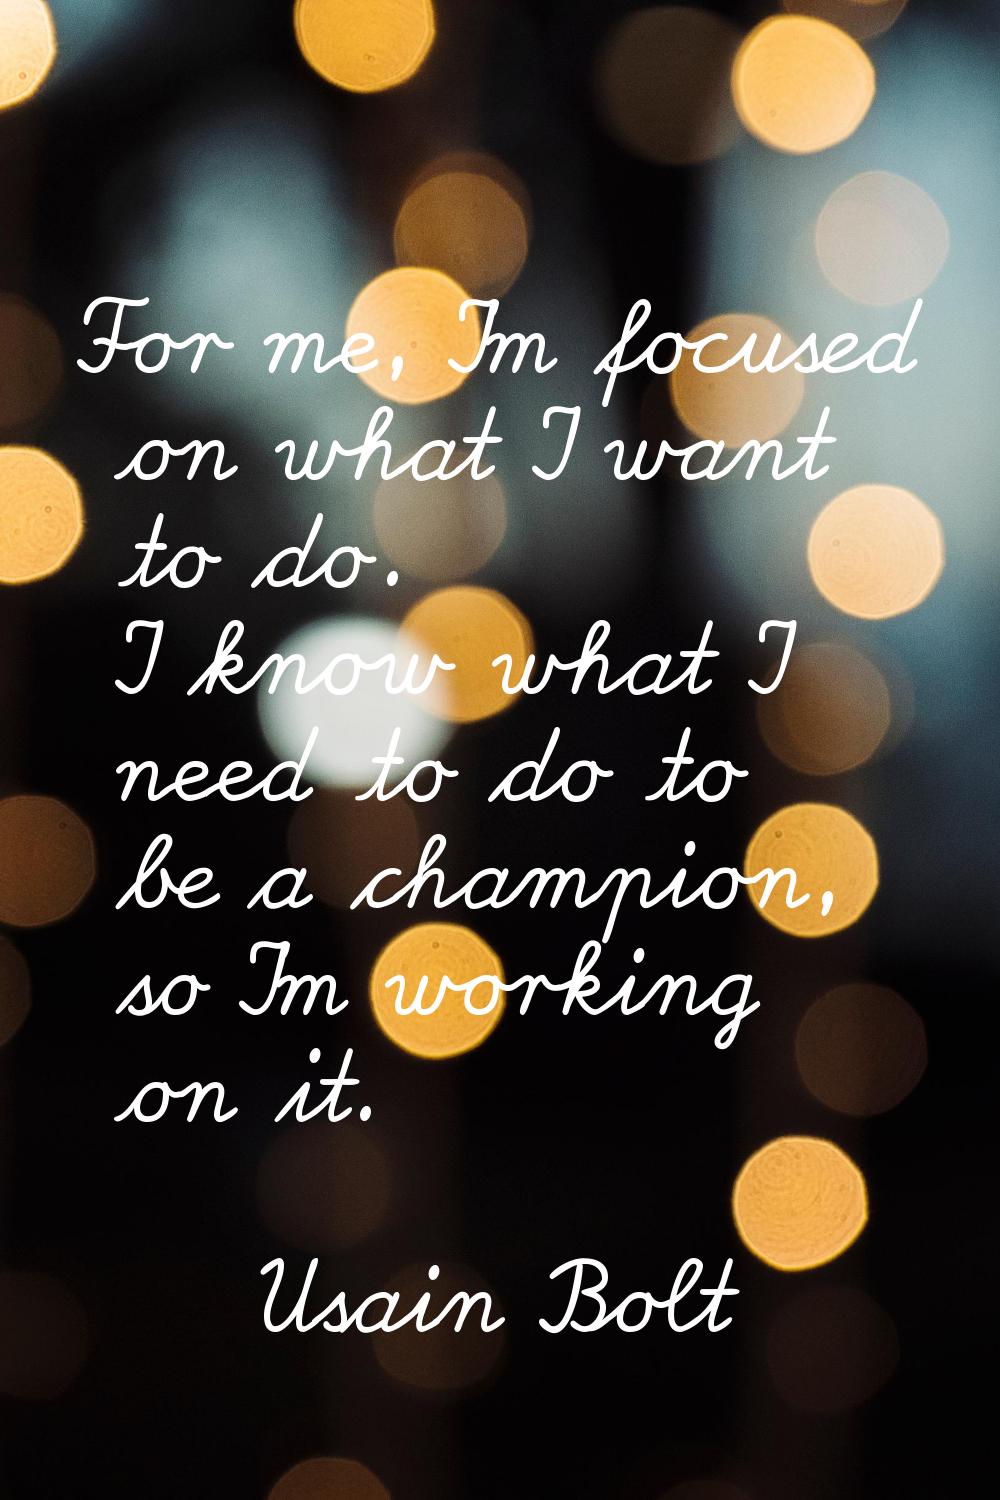 For me, I'm focused on what I want to do. I know what I need to do to be a champion, so I'm working